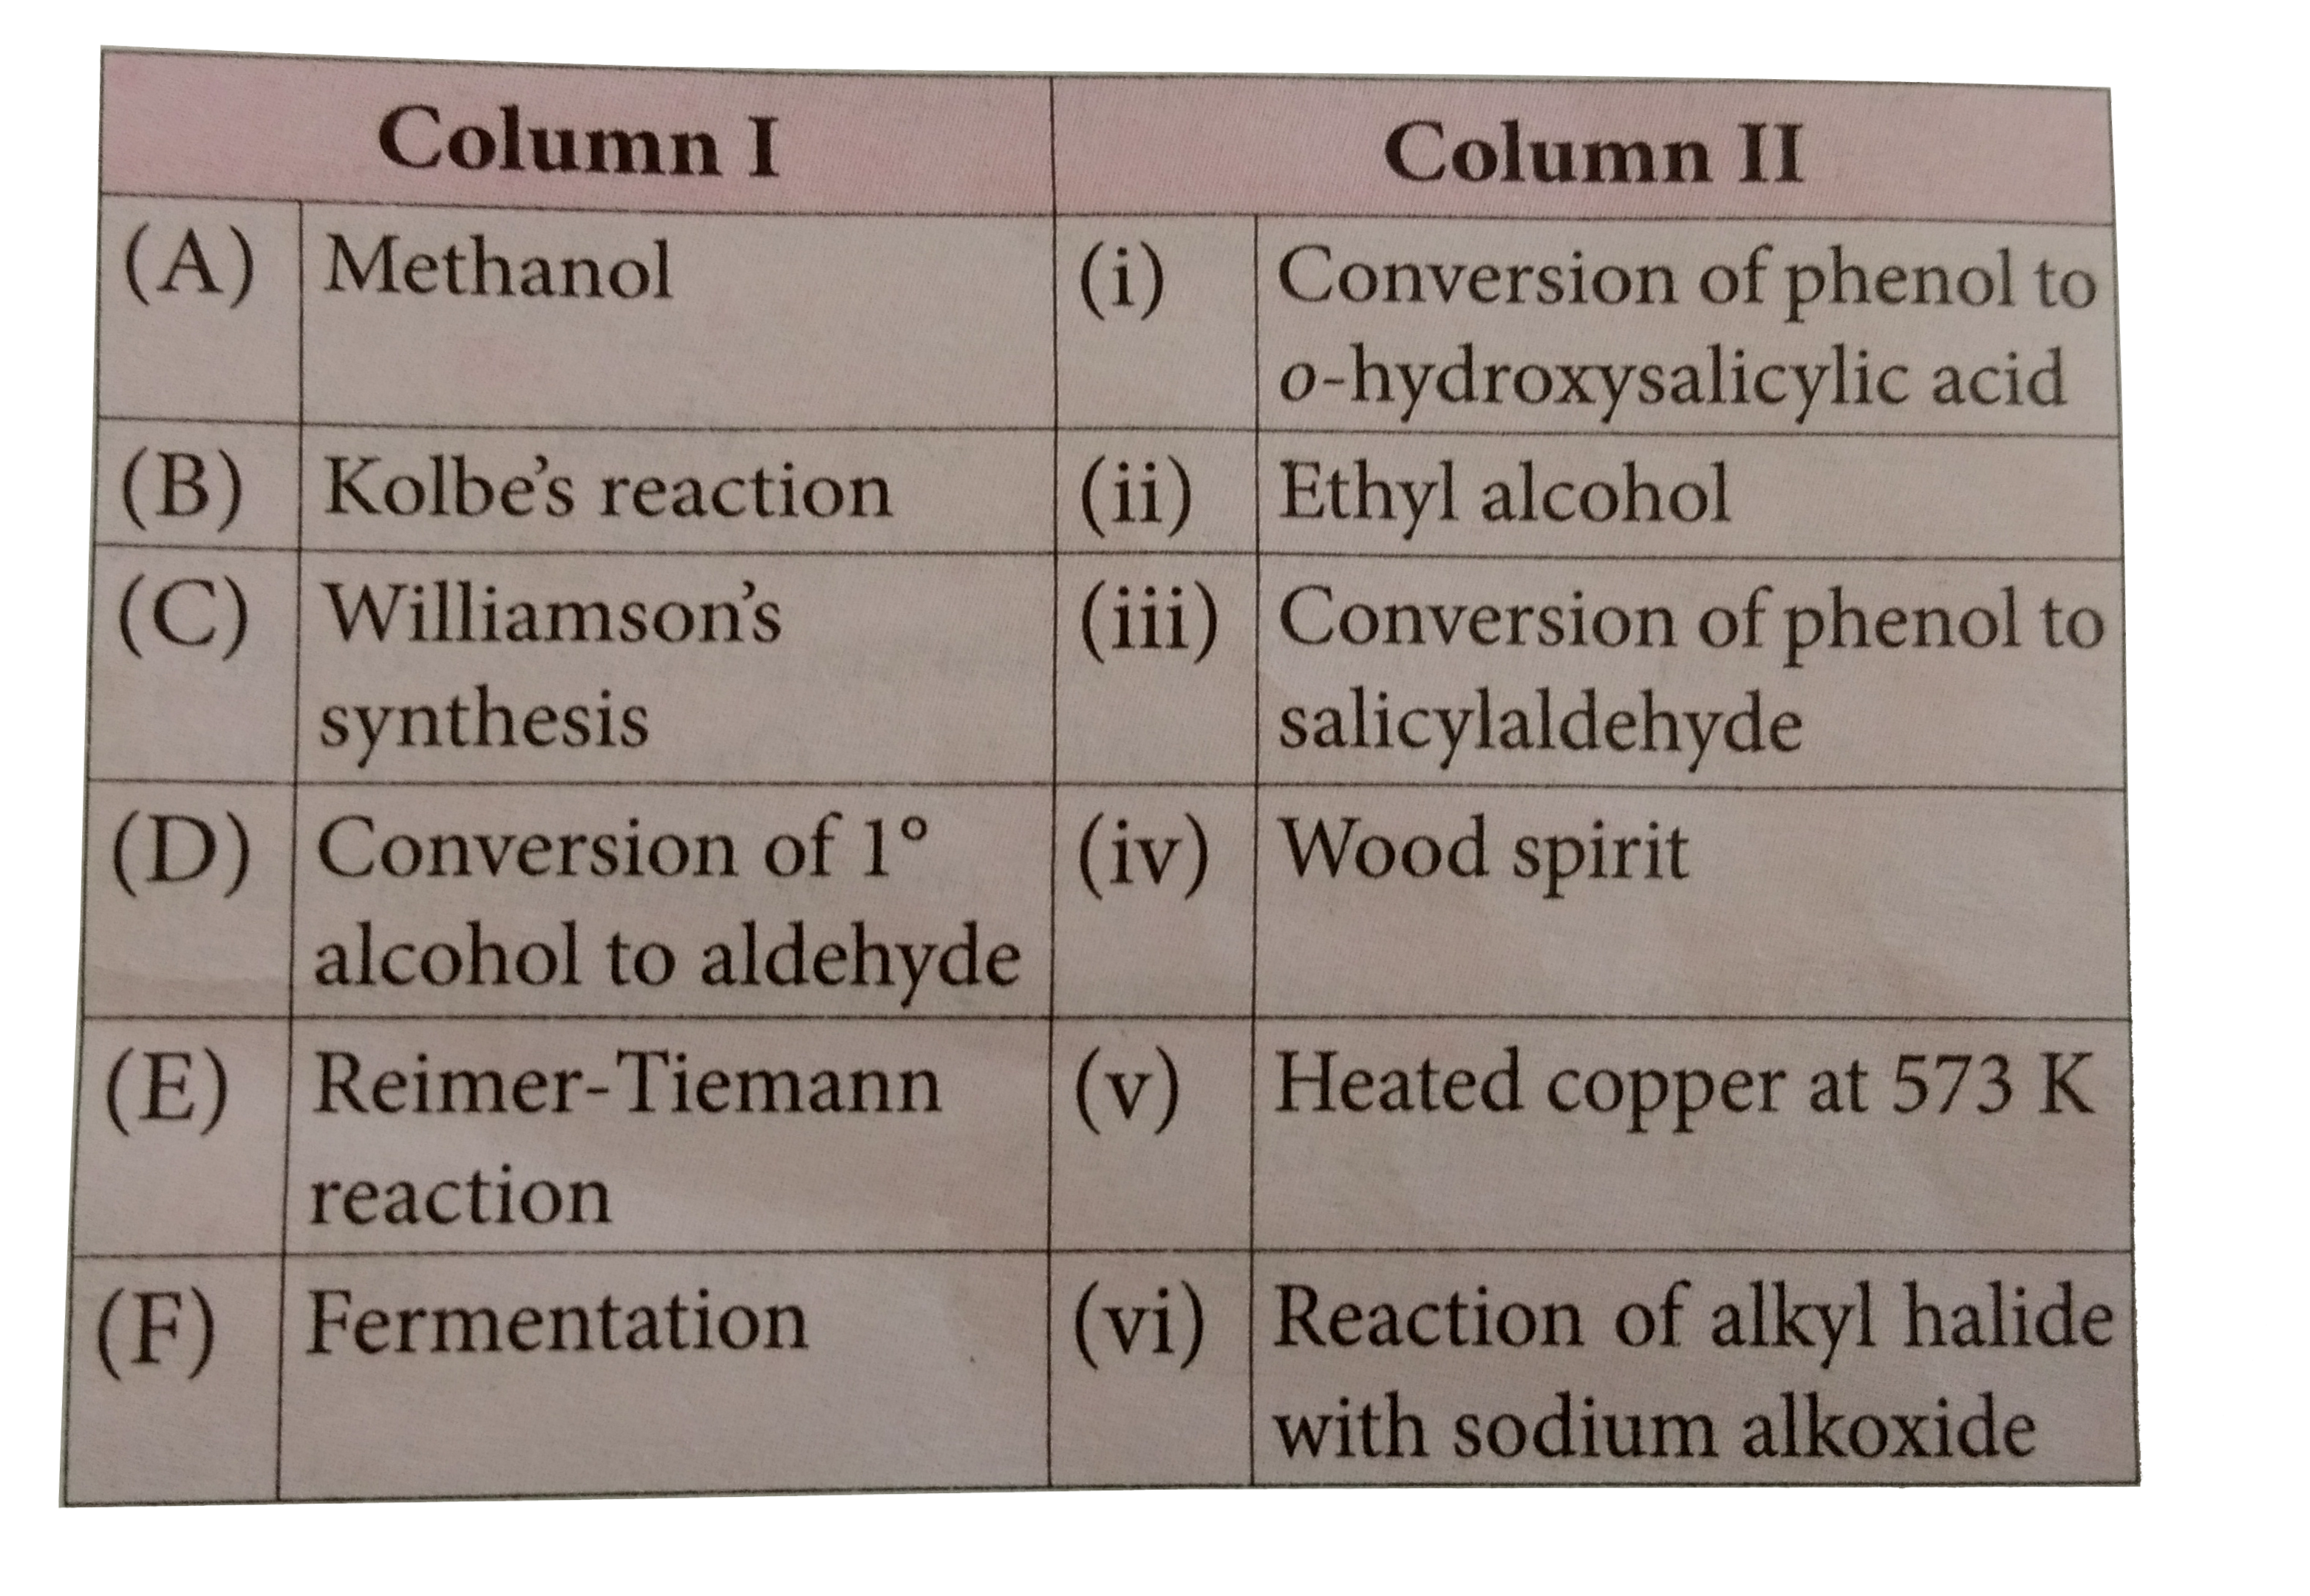 Match the column I with column II and mark the approprite choice.